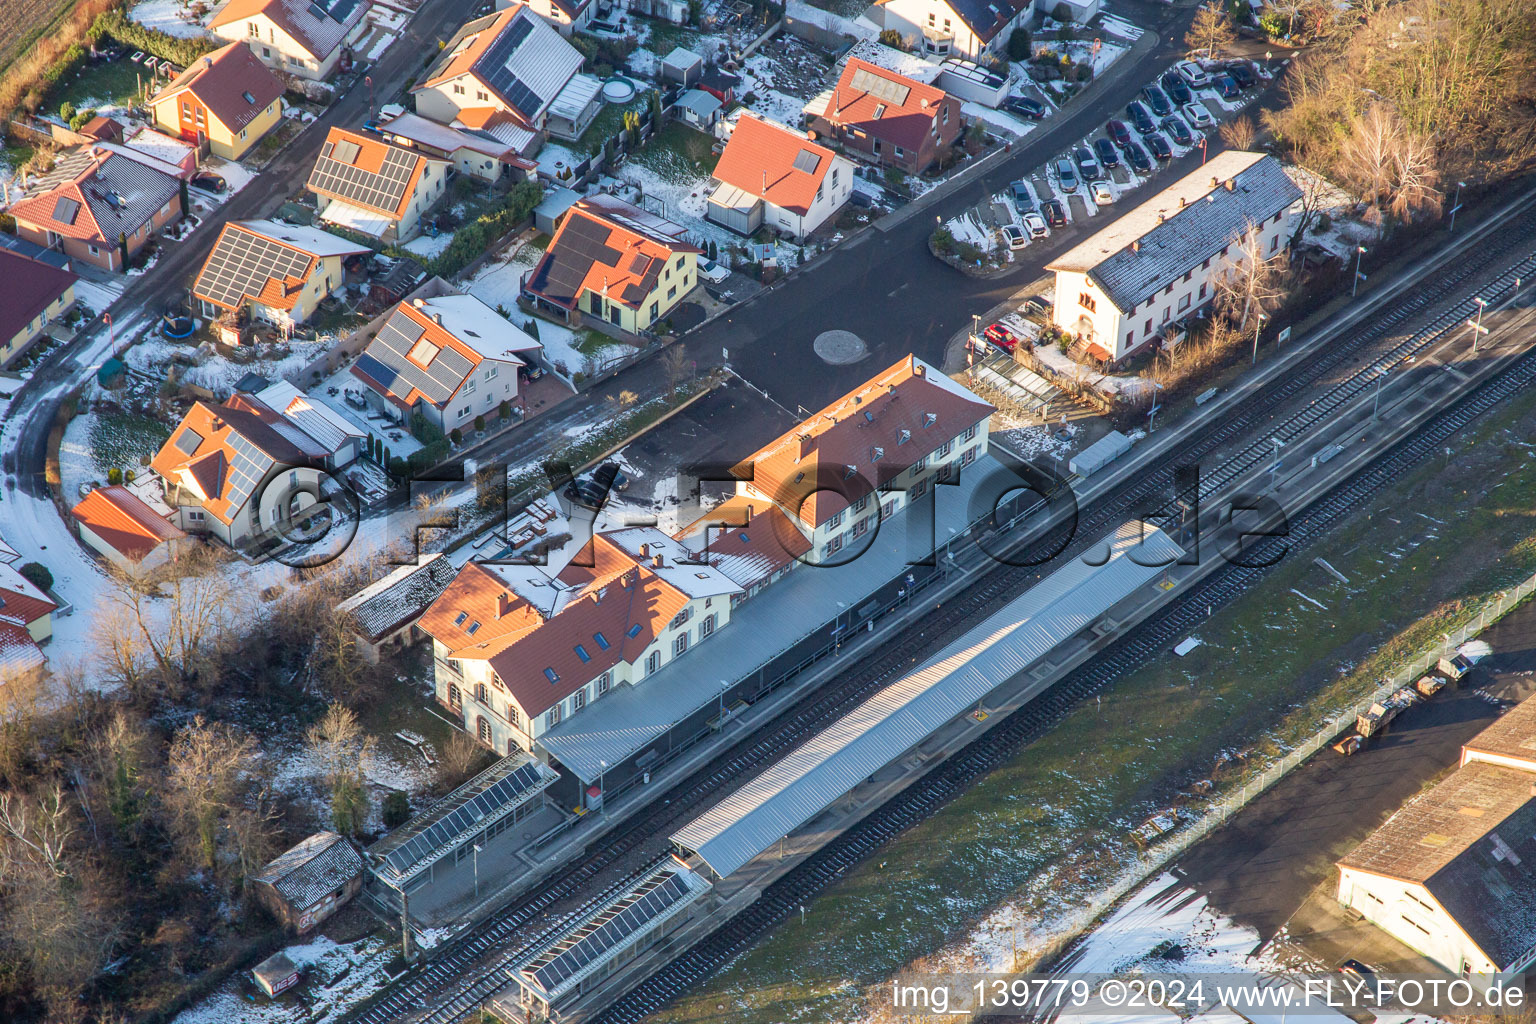 Aerial view of Station Winden and new development area Am bhf in Winden in the state Rhineland-Palatinate, Germany